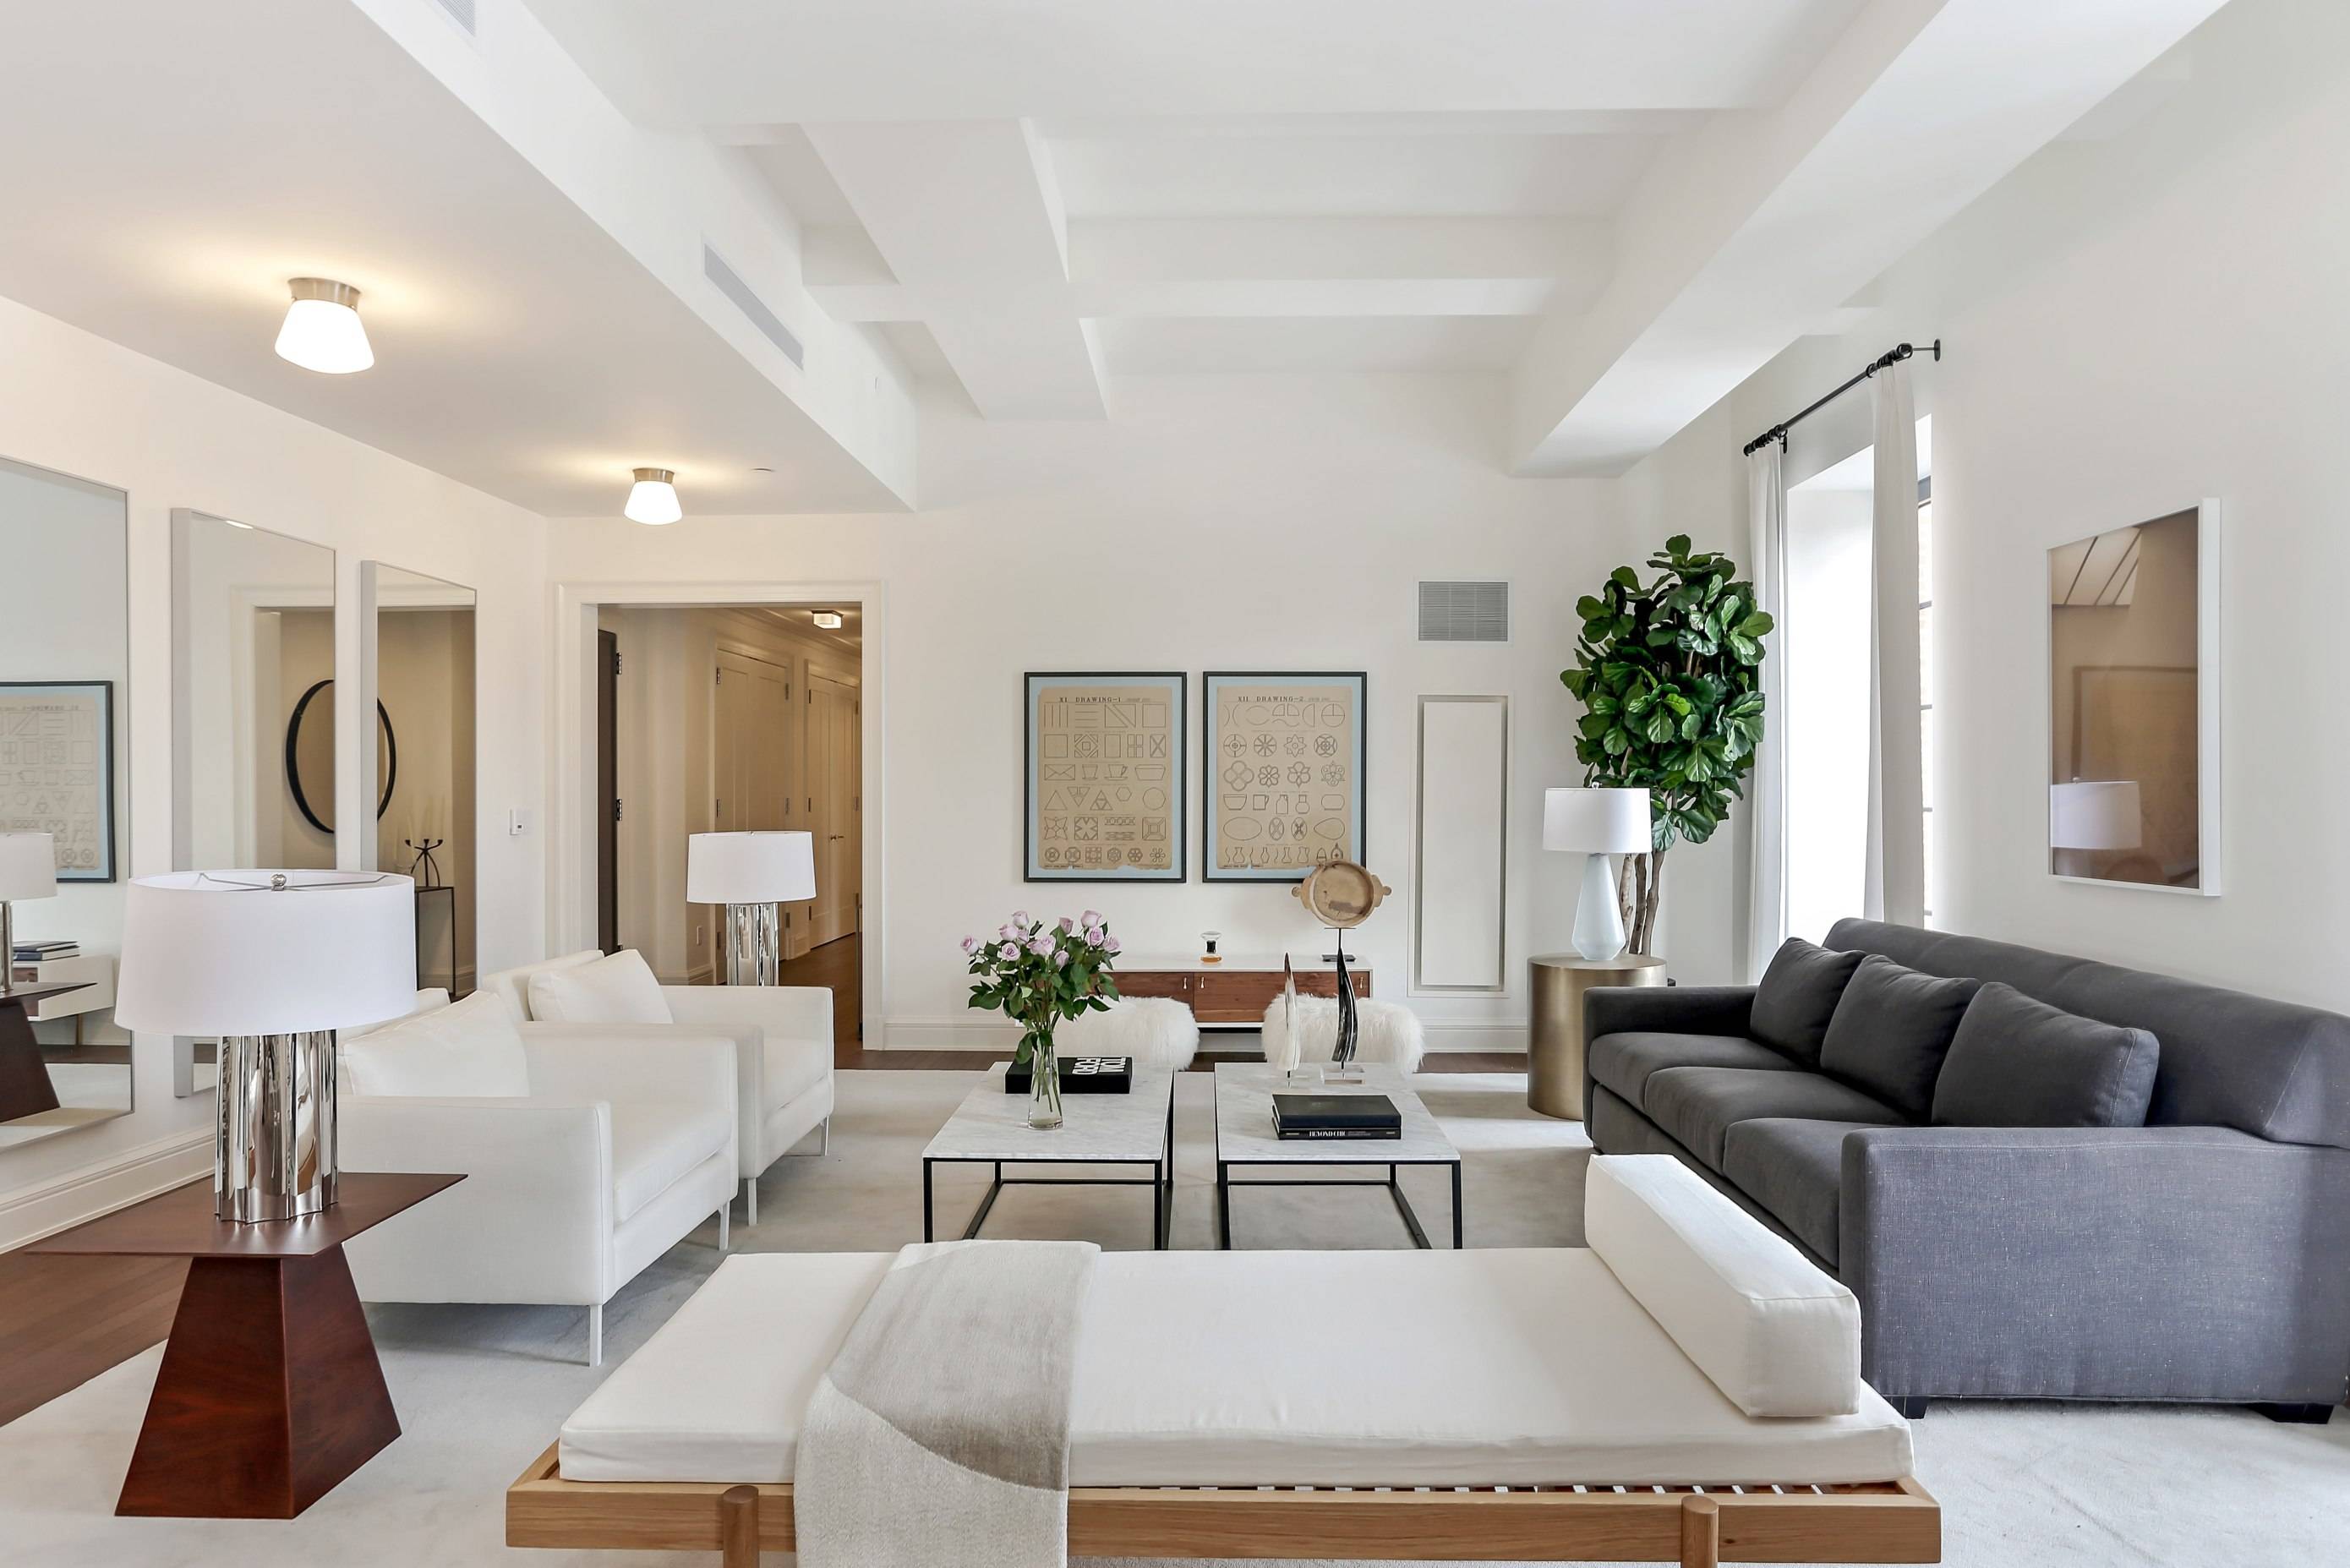 This exceptional 3BR 3. 5BA residence on West Twelfth Street offers rare northern exposures over some of the most coveted blocks in the West Village from a private 221 sf ...